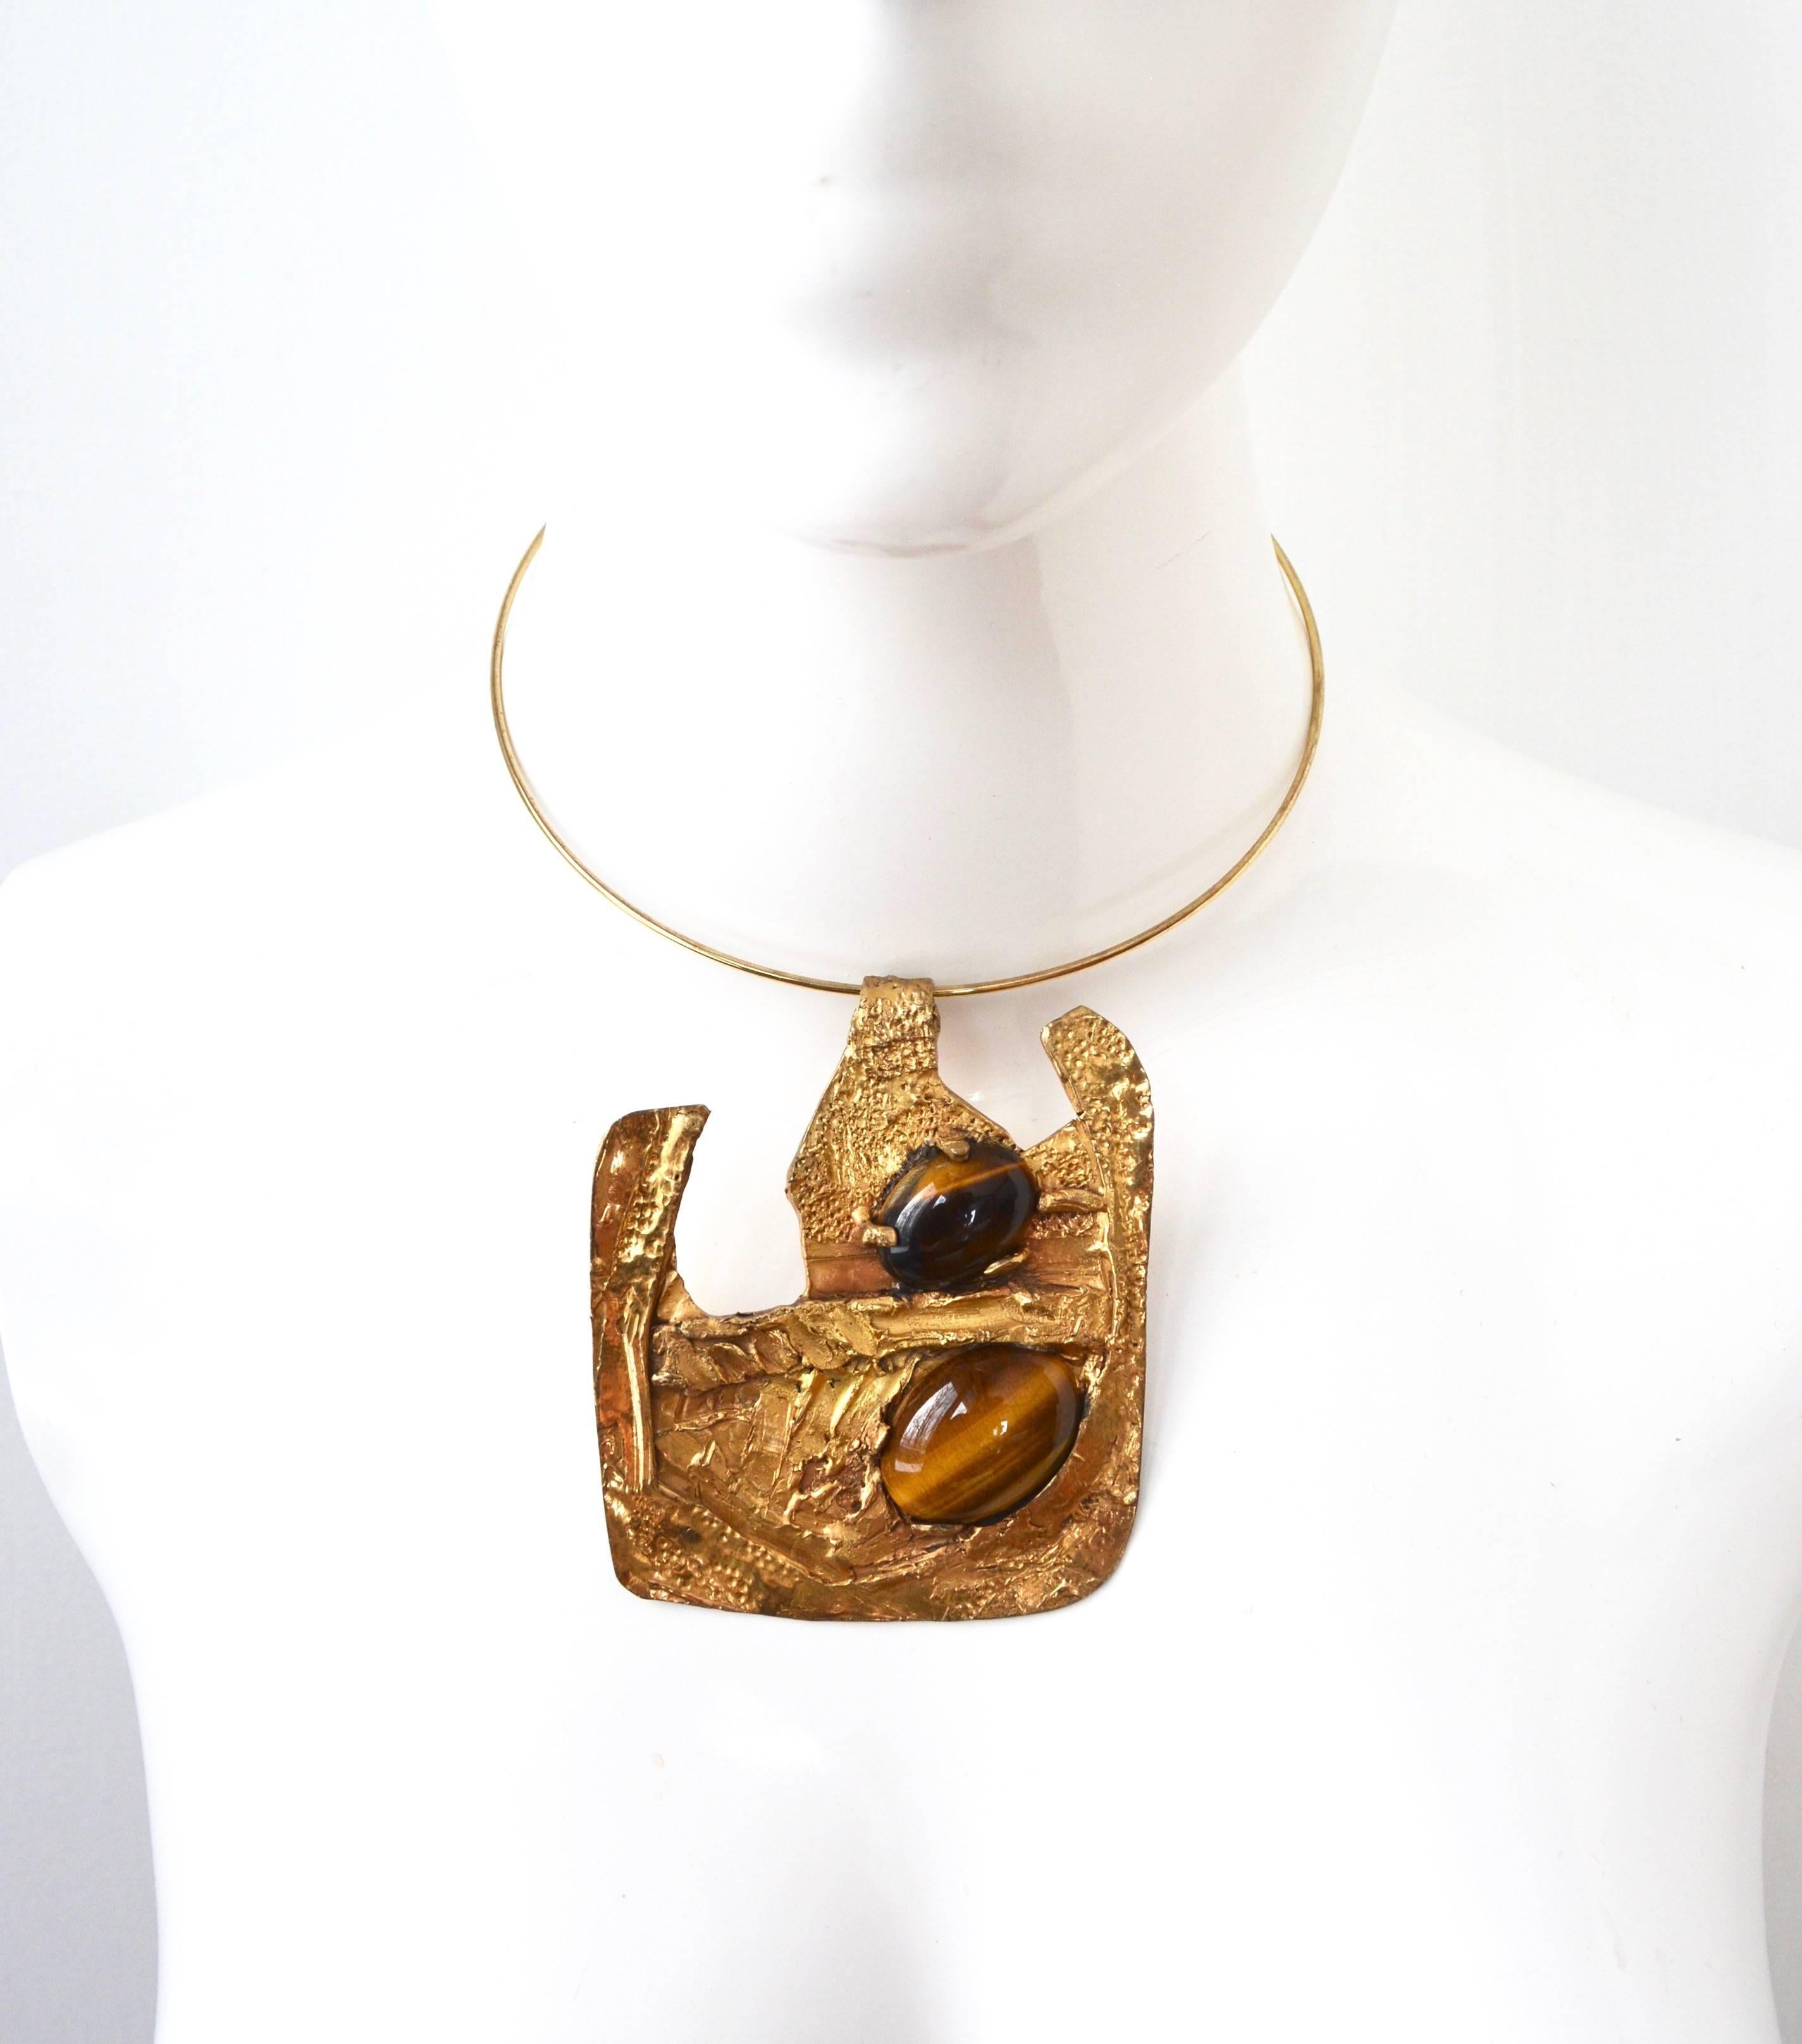 Oversized brutalist style gilt metal and true tigers eye stone pendant on a collar style choker. Good condition, mild finish wear on the back mostly. 3.5″ long x 3″ wide. About 16″ around. unsigned.